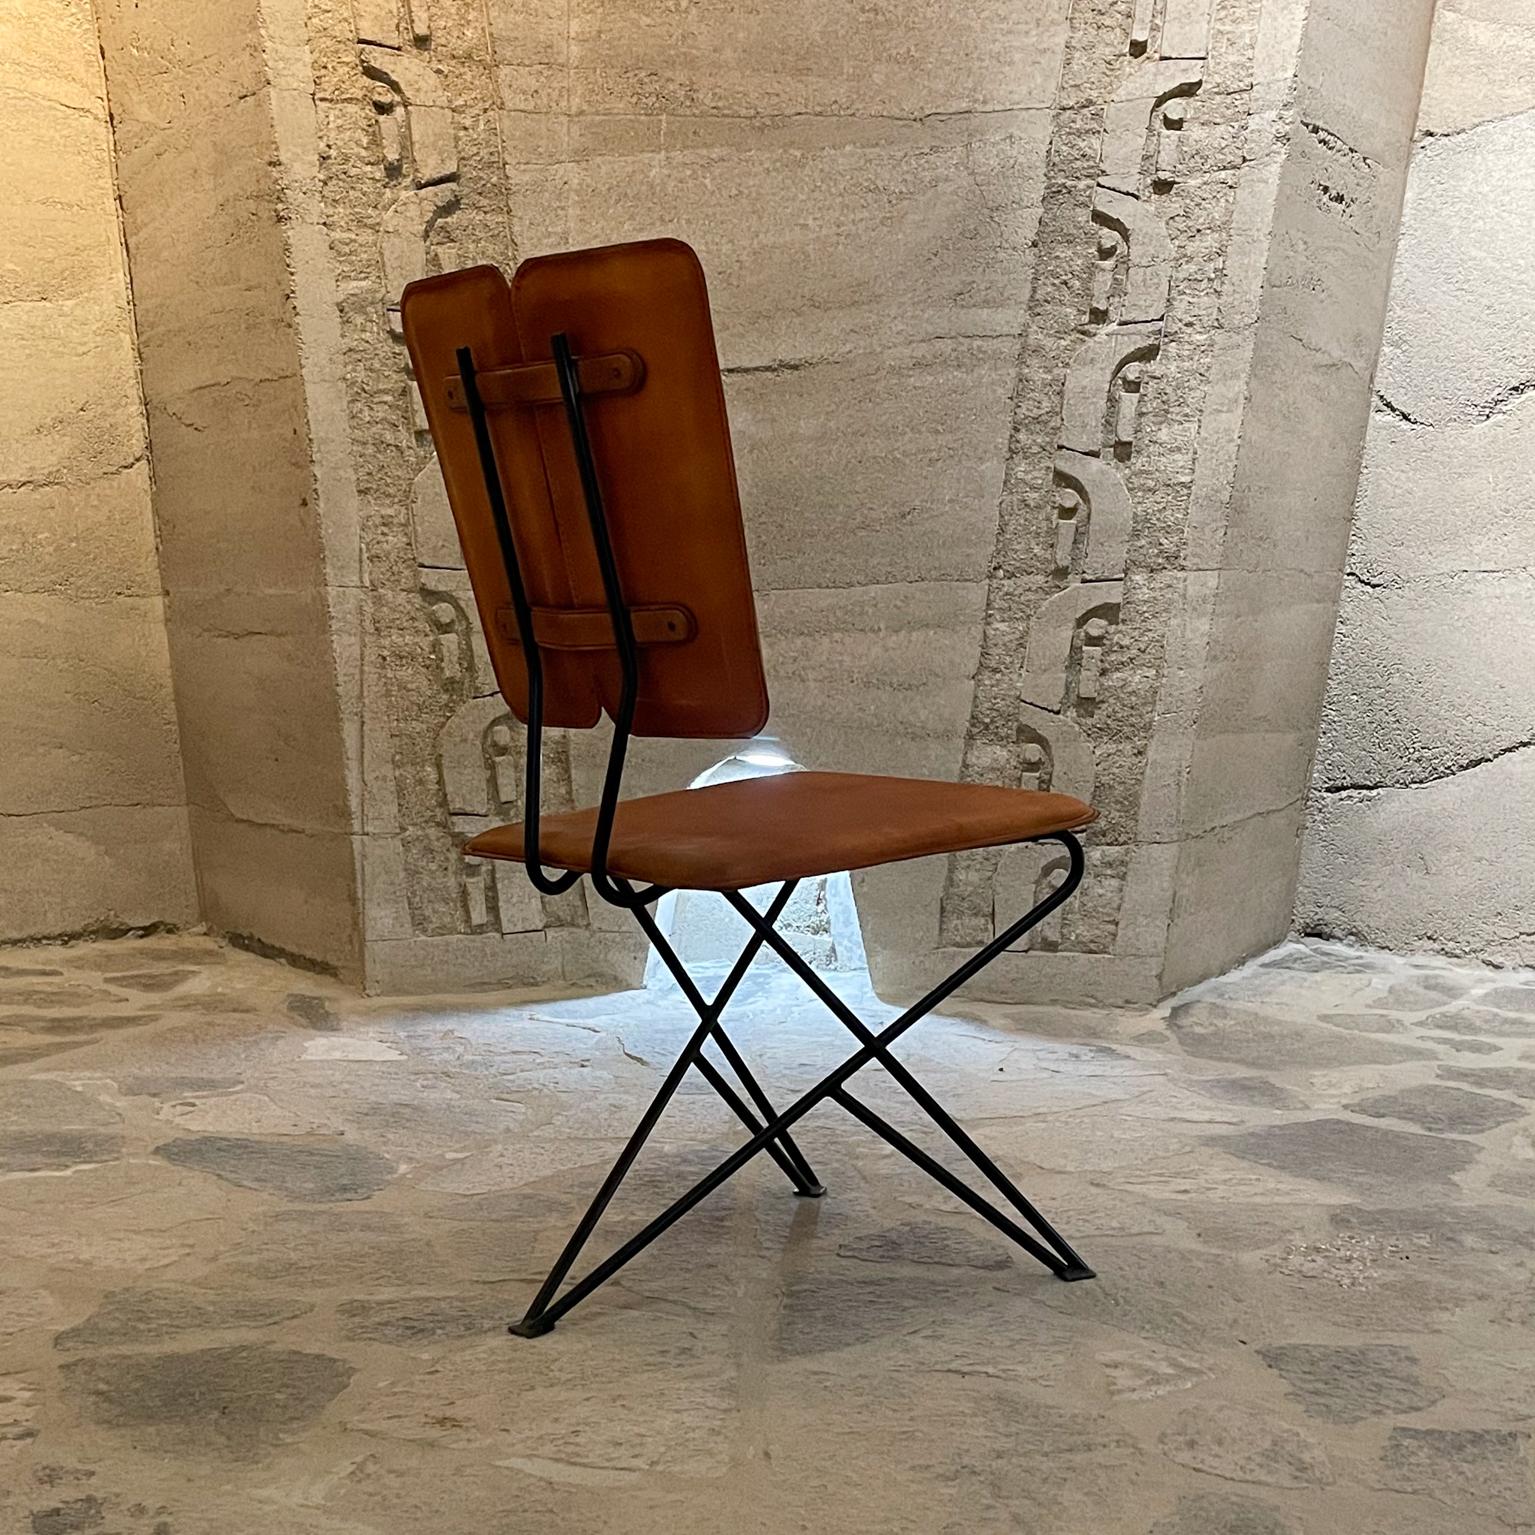 Pablex Leather Tripod Chair Pablo Romo for AMBIANIC In New Condition For Sale In Chula Vista, CA